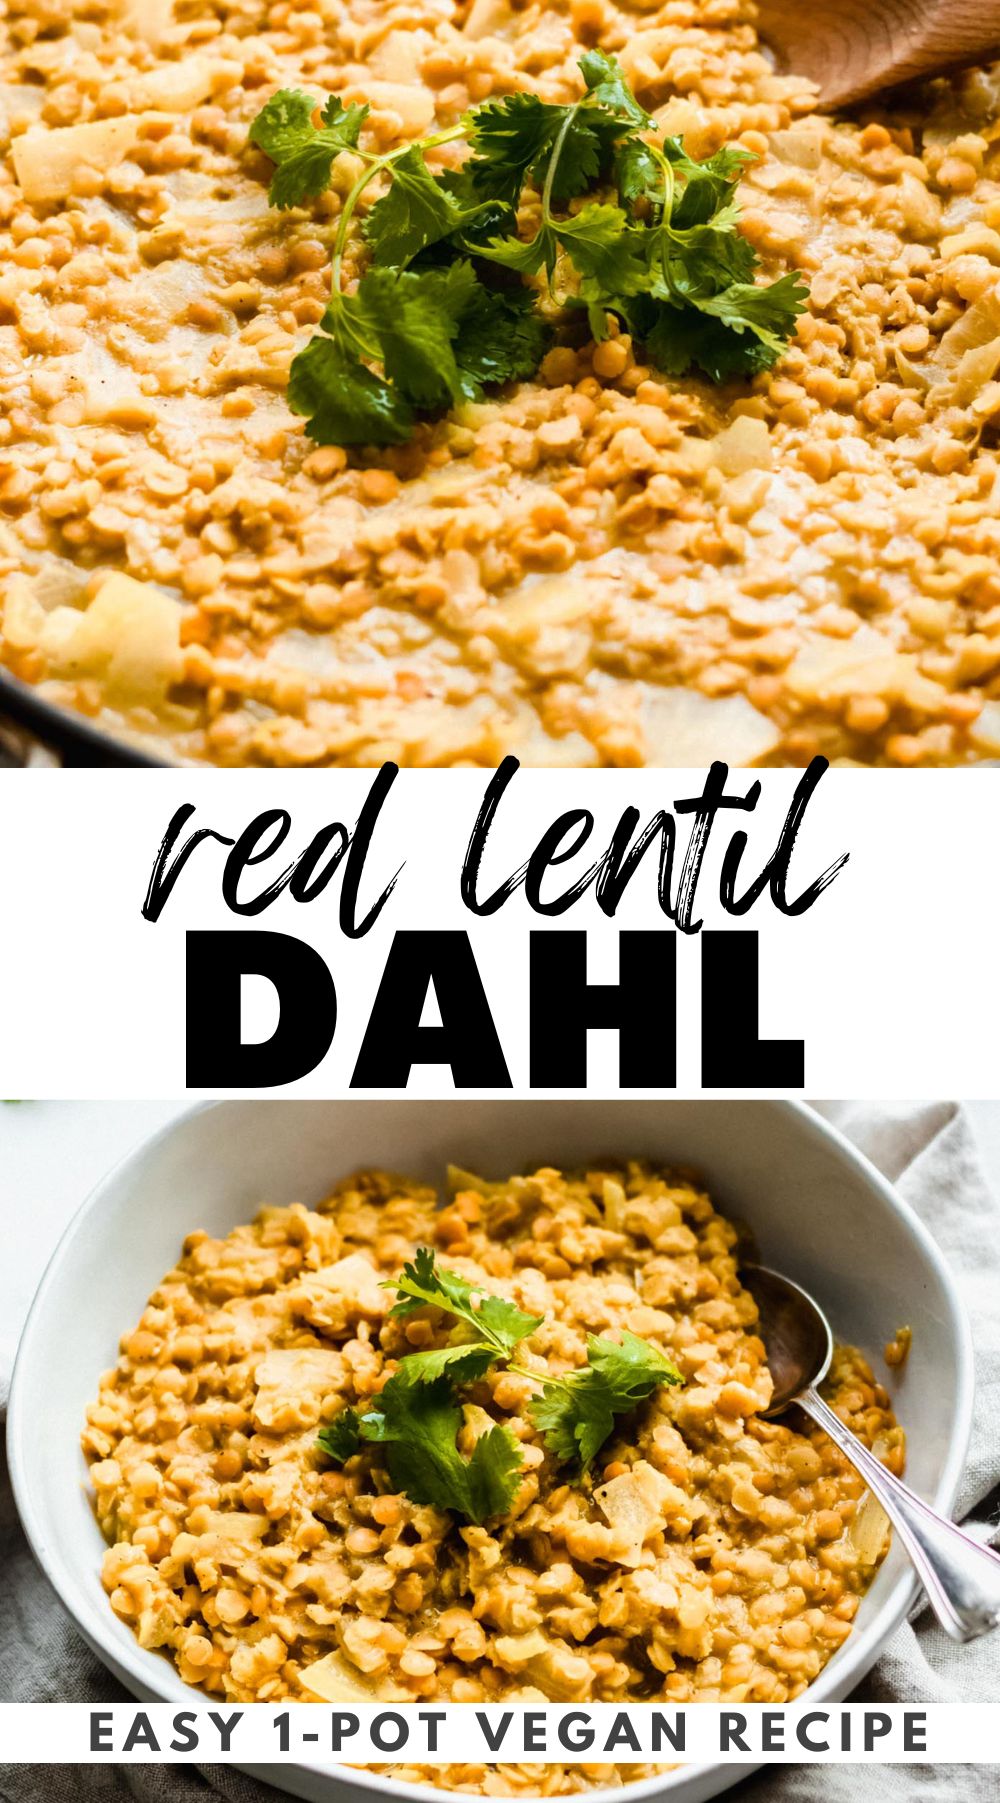 Pinterest graphic for the best vegan red lentil dahl recipe with an image of the dahl and a text title.